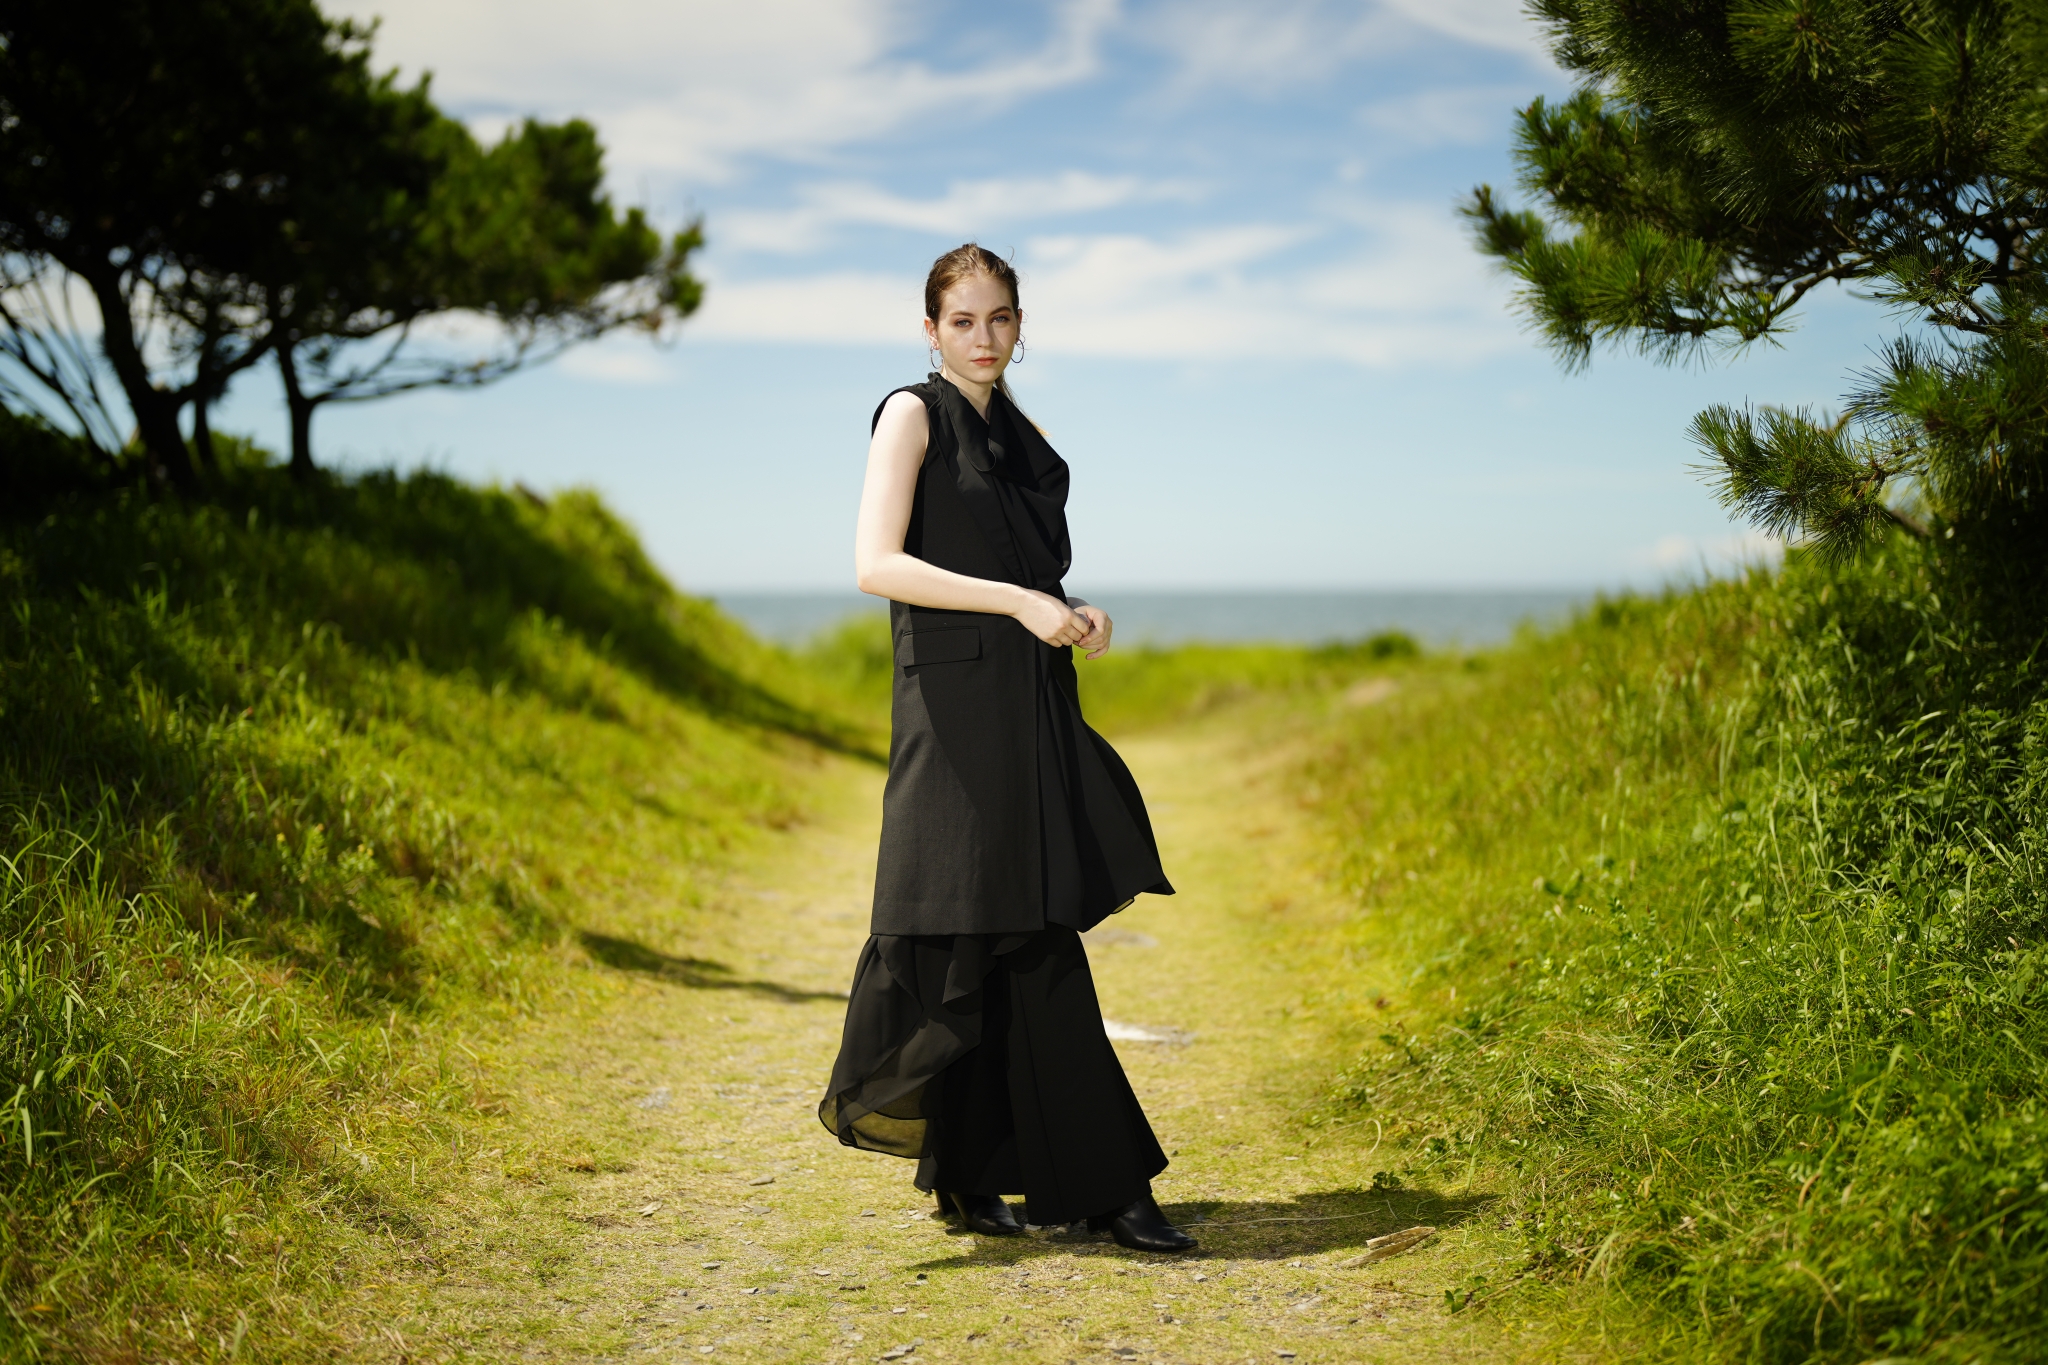 Female model in a long black dress stood on a grassy path leading to the ocean